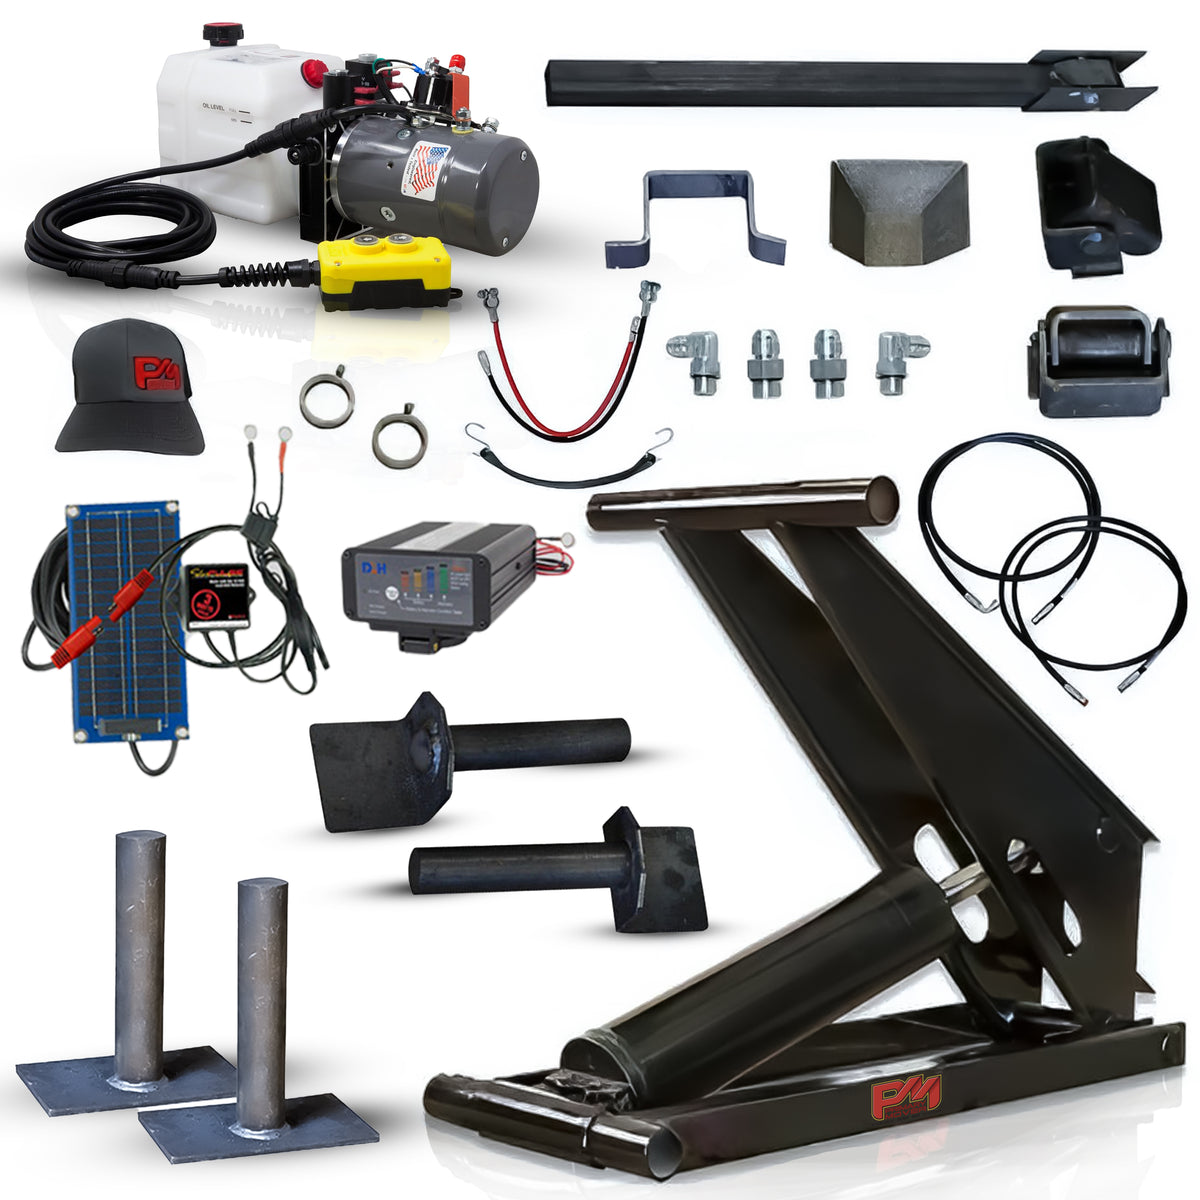 Hydraulic Scissor Hoist Kit - 8 Ton Capacity - Fits 10-14' Dump Body | PF-516: A collage featuring various equipment including a black machine with wires, a black box with colorful buttons, and a close-up of a solar panel.